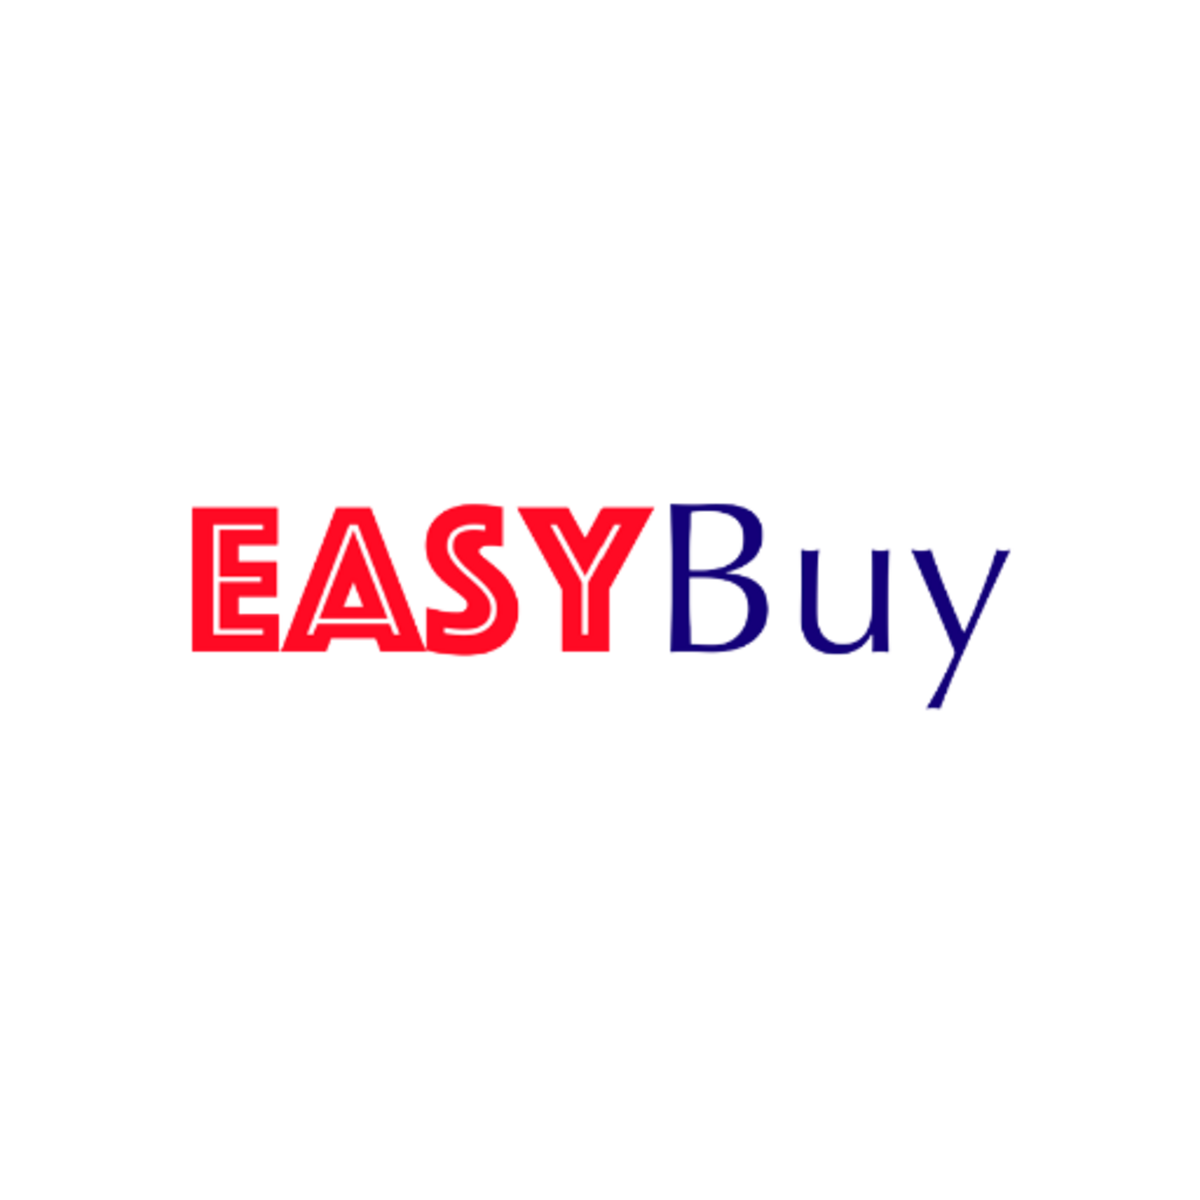 How to Buy Phone and Pay Later with EasyBuy